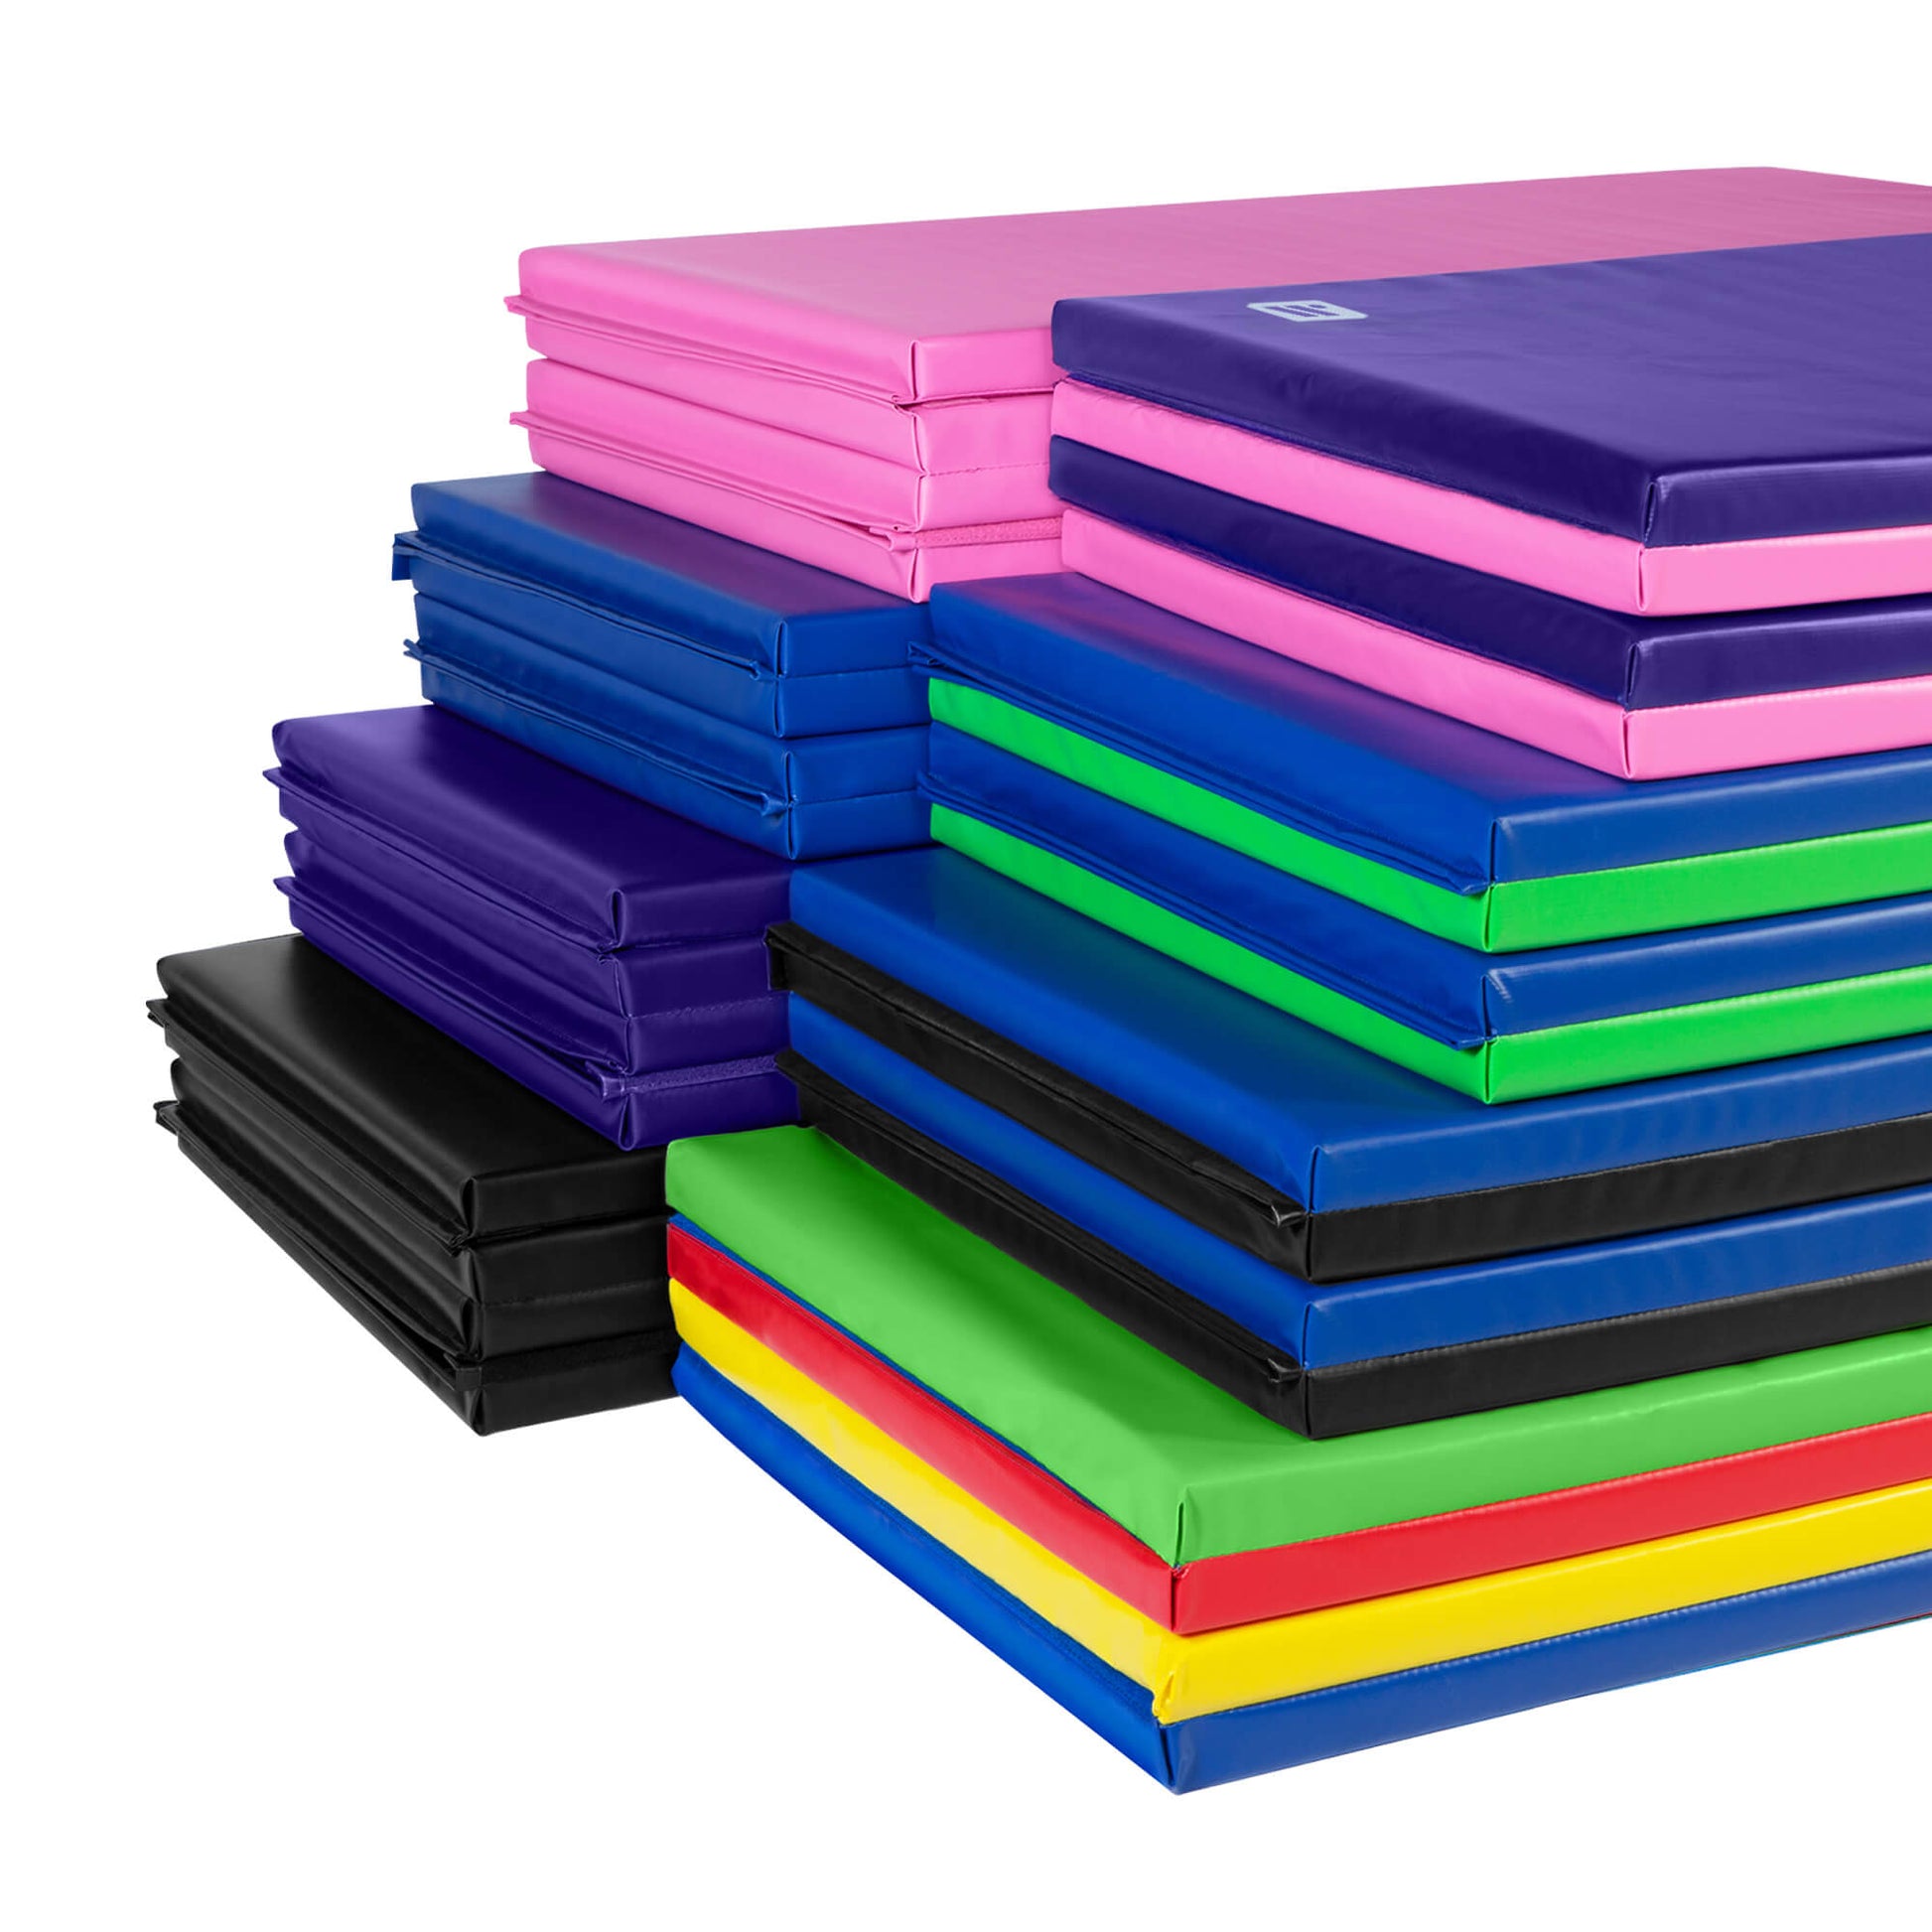 Stacked 4x6 Exercise Mats Multiple Colors